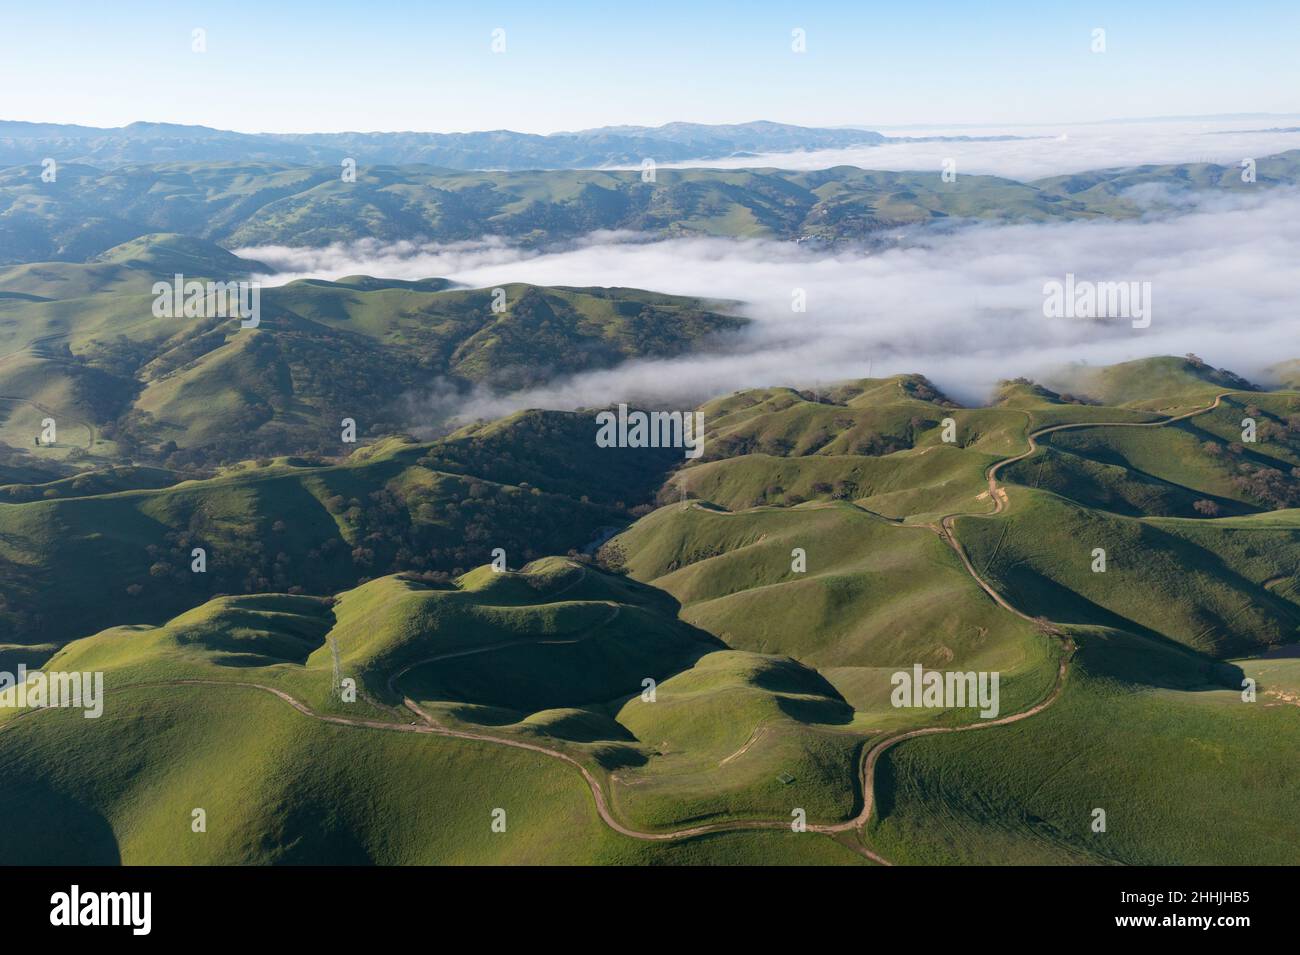 The marine layer seeps over the green, rolling hills and valleys of Livermore, Northern California, just east of San Francisco Bay. Stock Photo